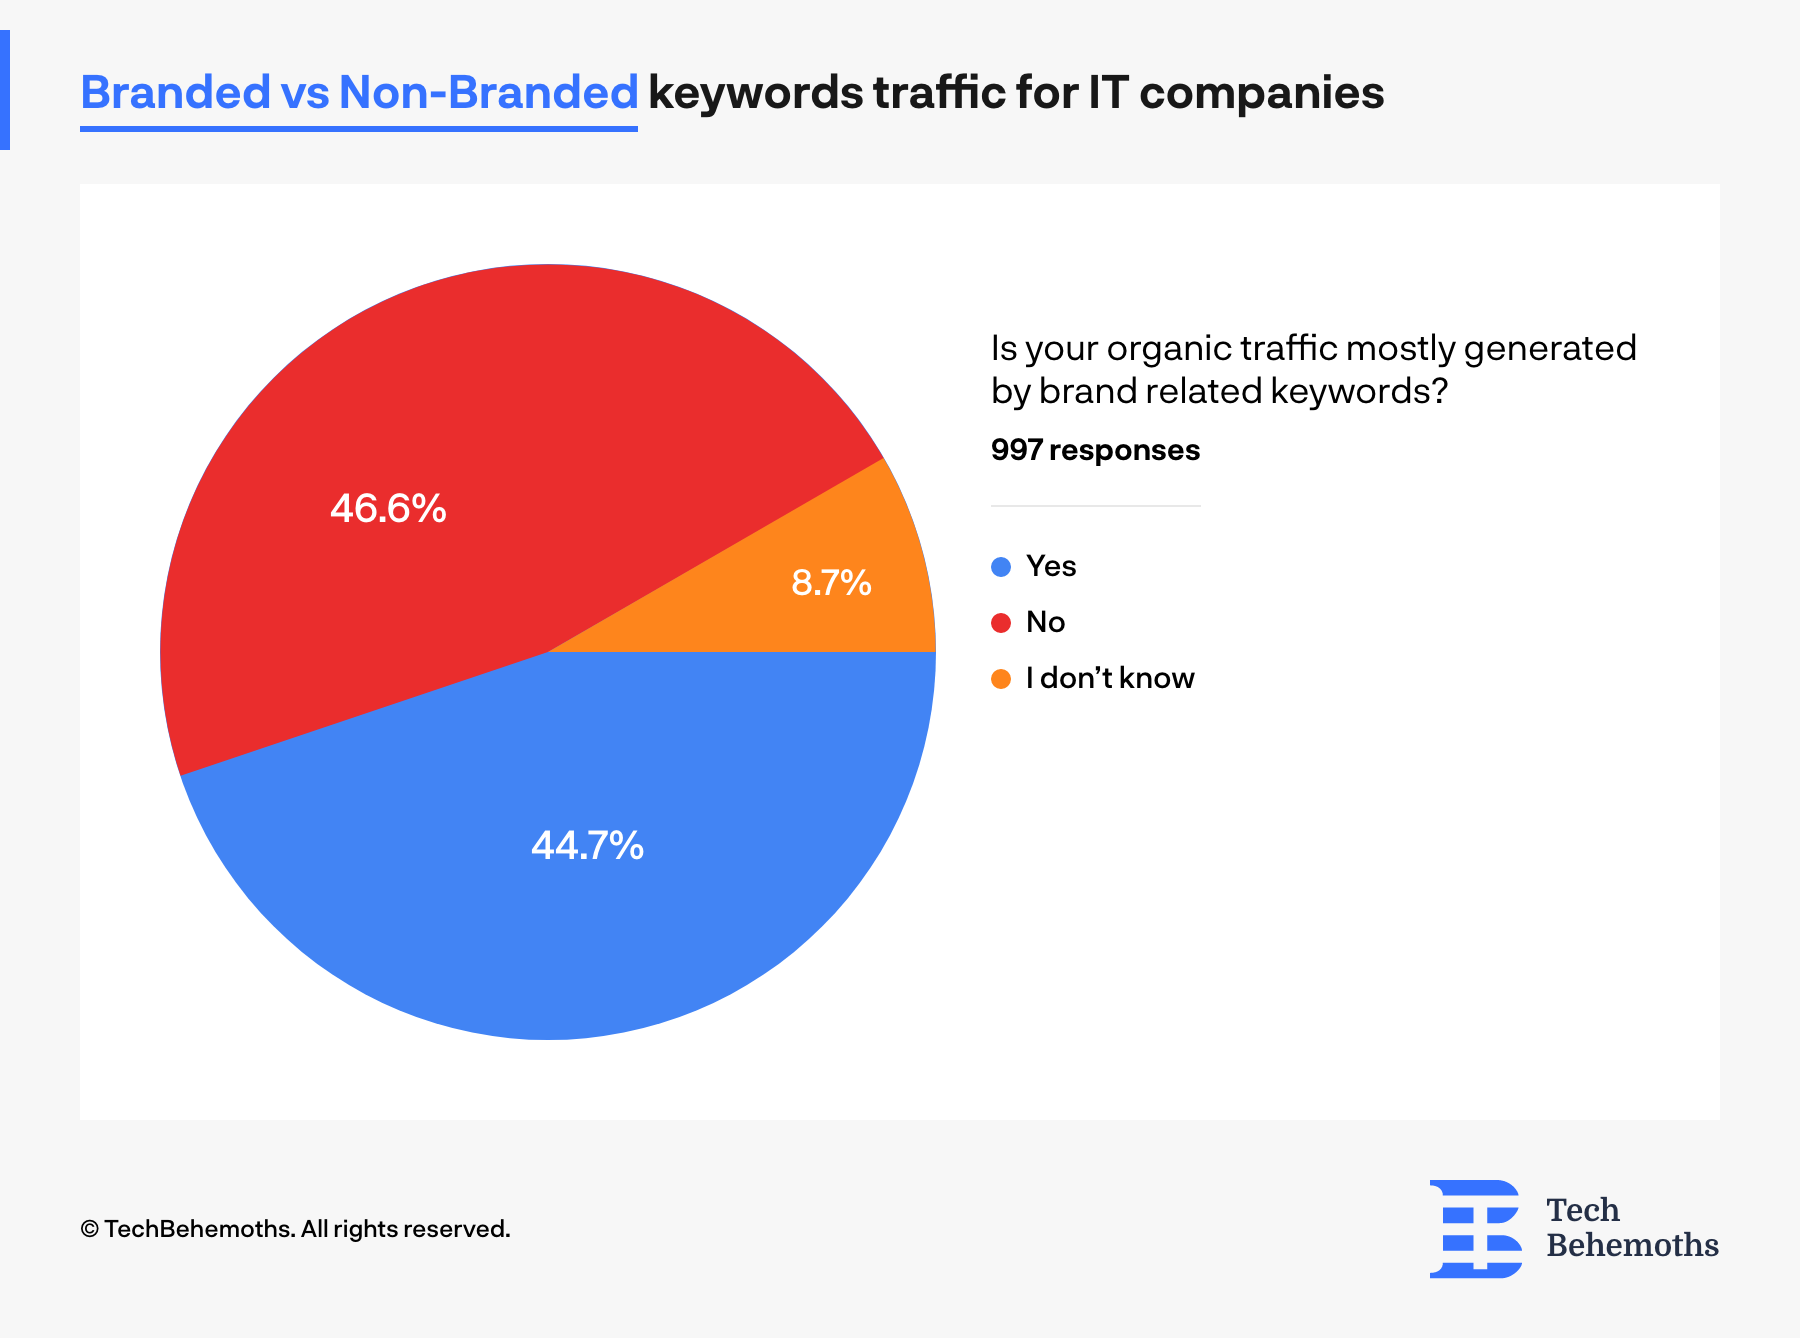 half of companies use branded keywords to gain leads, while other half of companies use informative content with no branding keywords